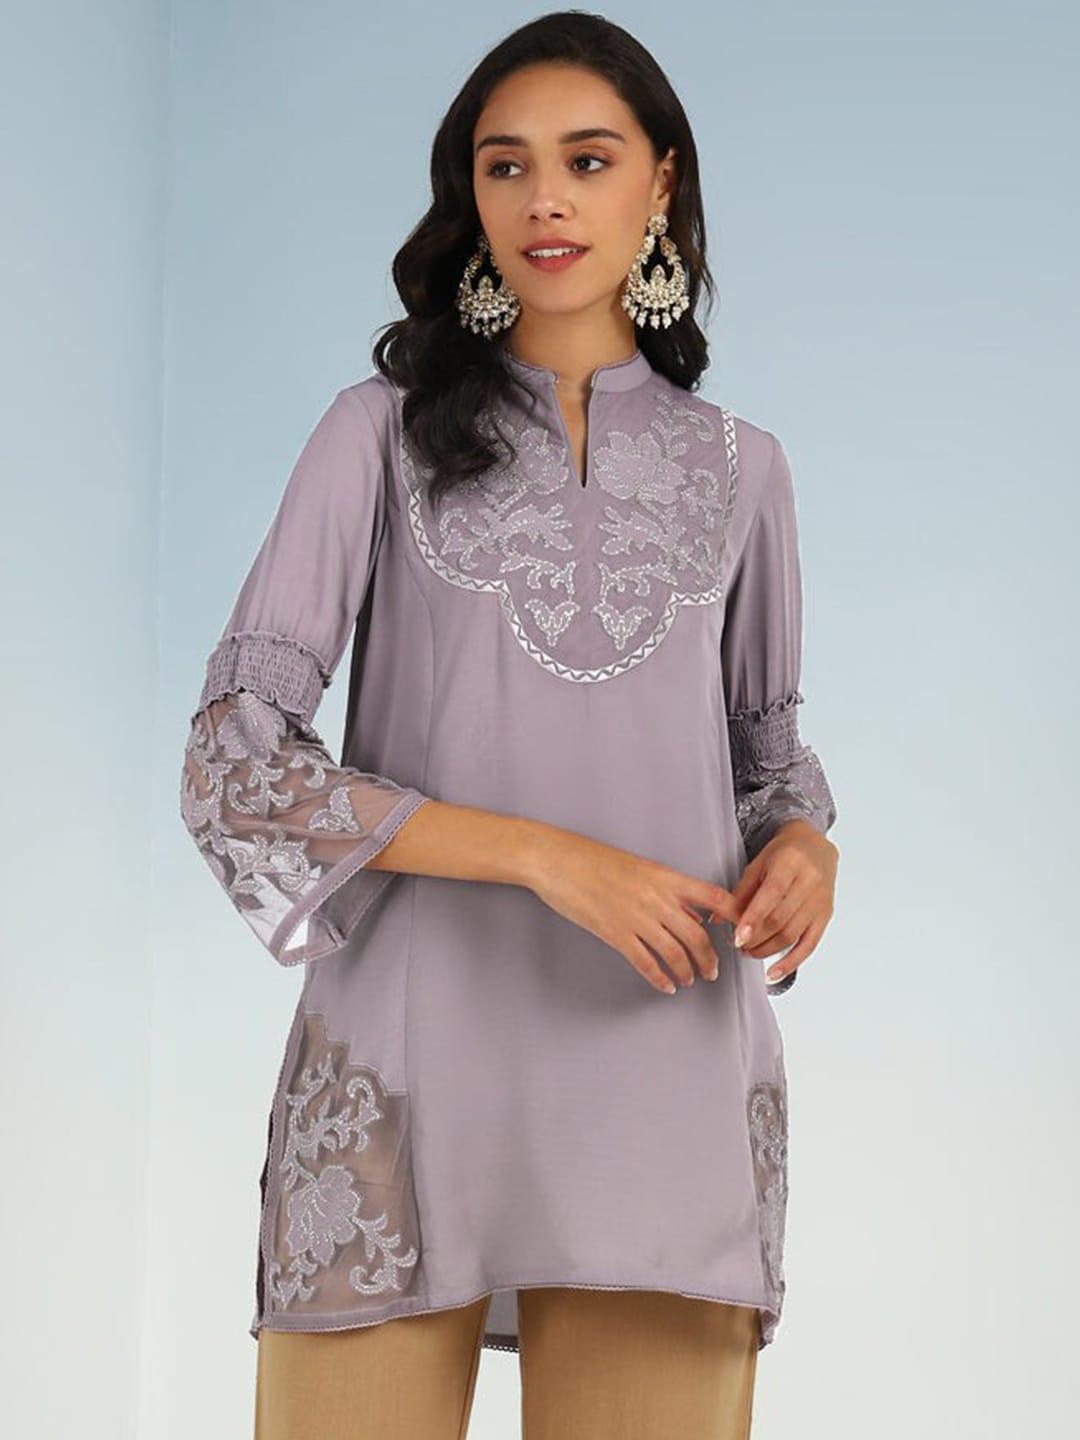 lakshita floral embroidered lace inserts tunic